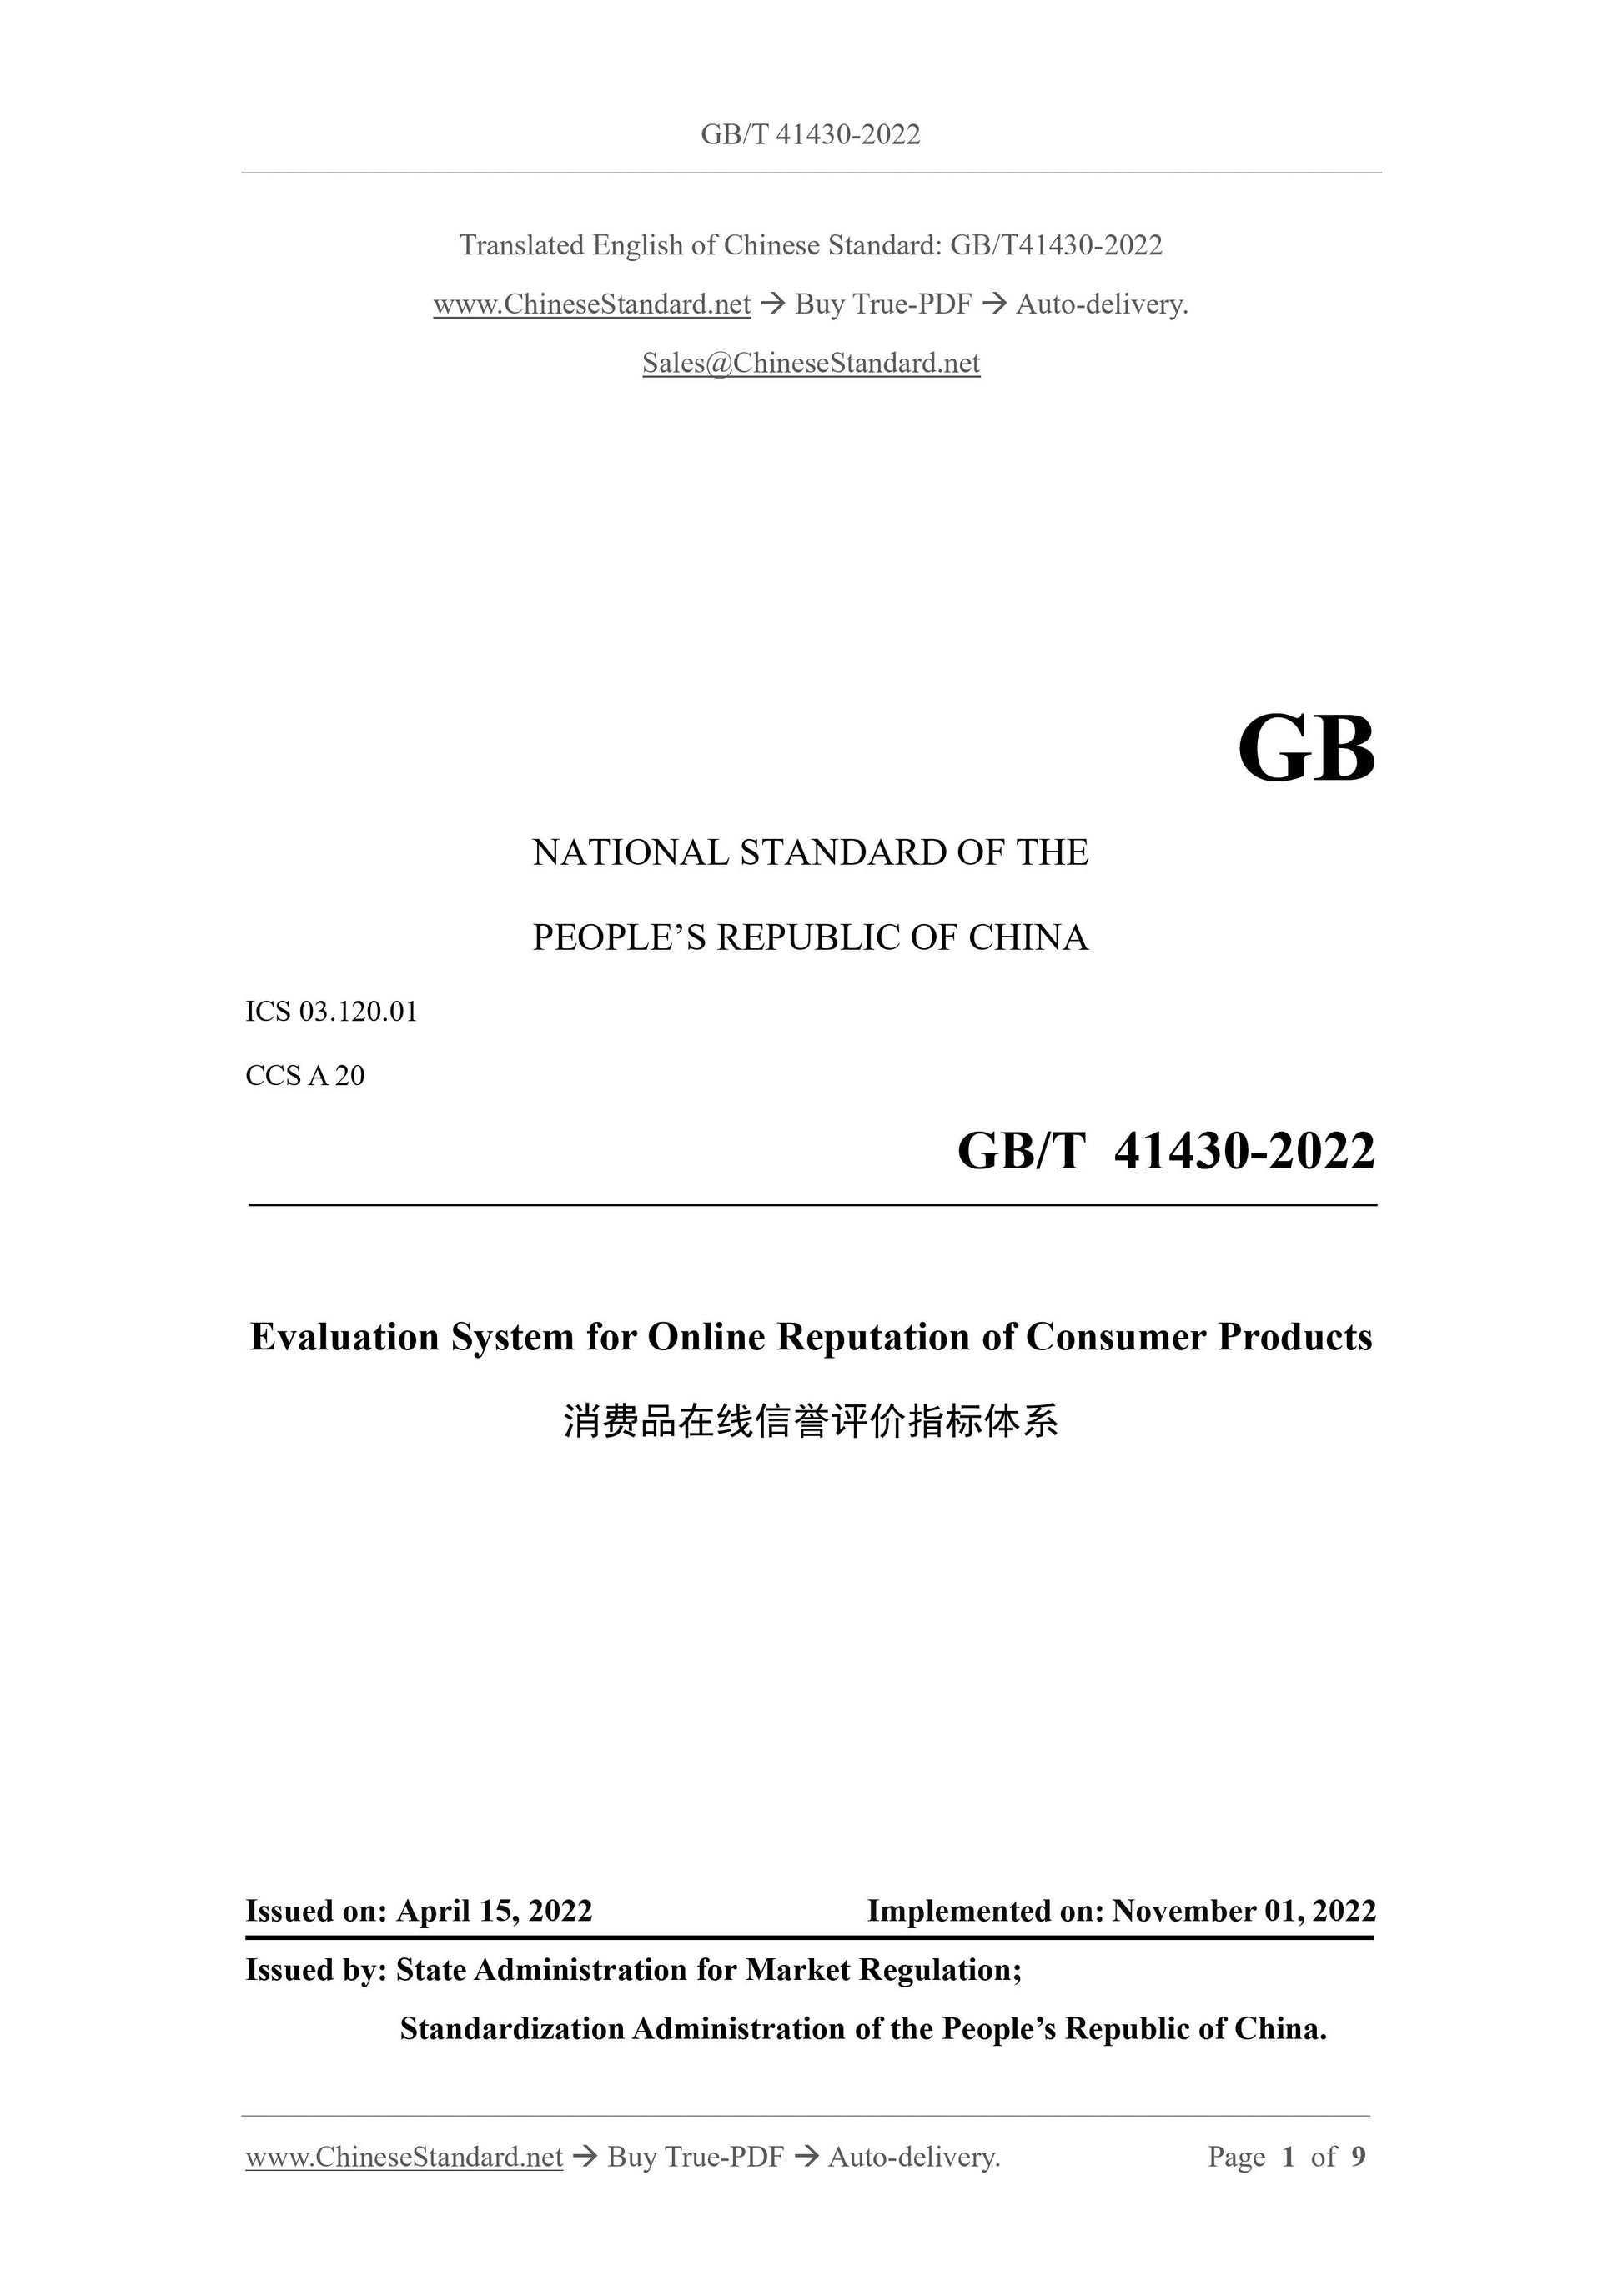 GB/T 41430-2022 Page 1